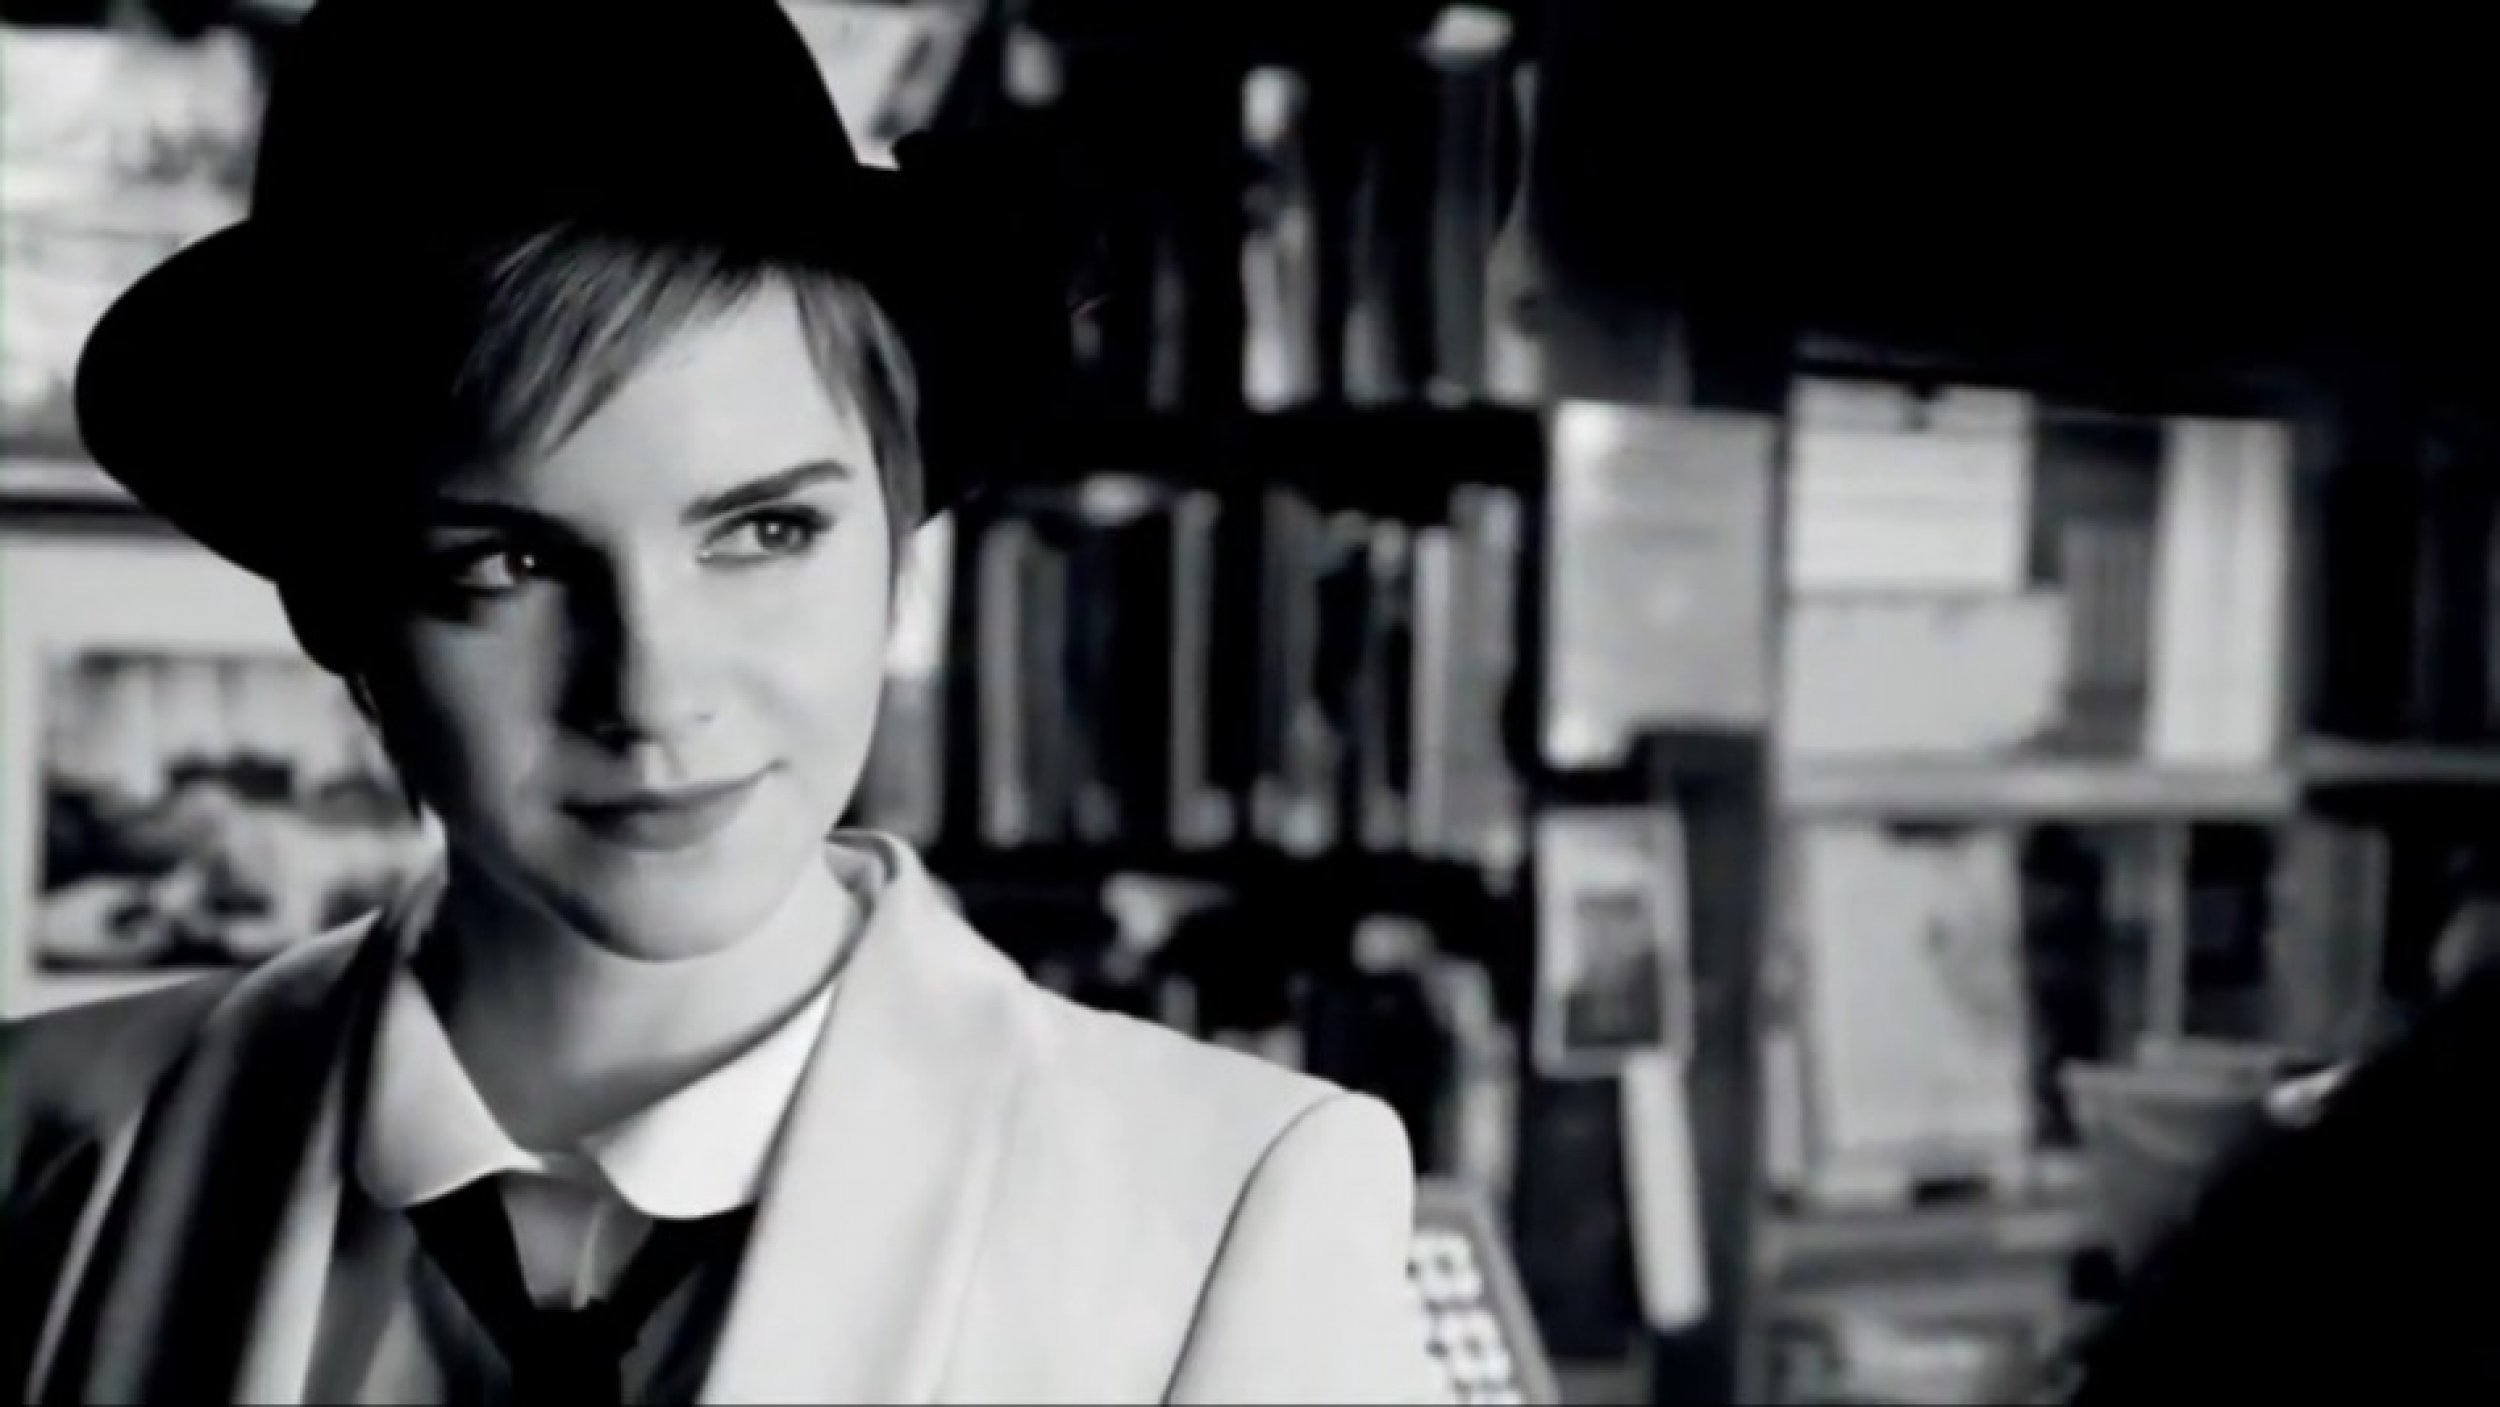 Most Stunning Images Emma Watson Dazzles in New Perfume Ad for Lancme.